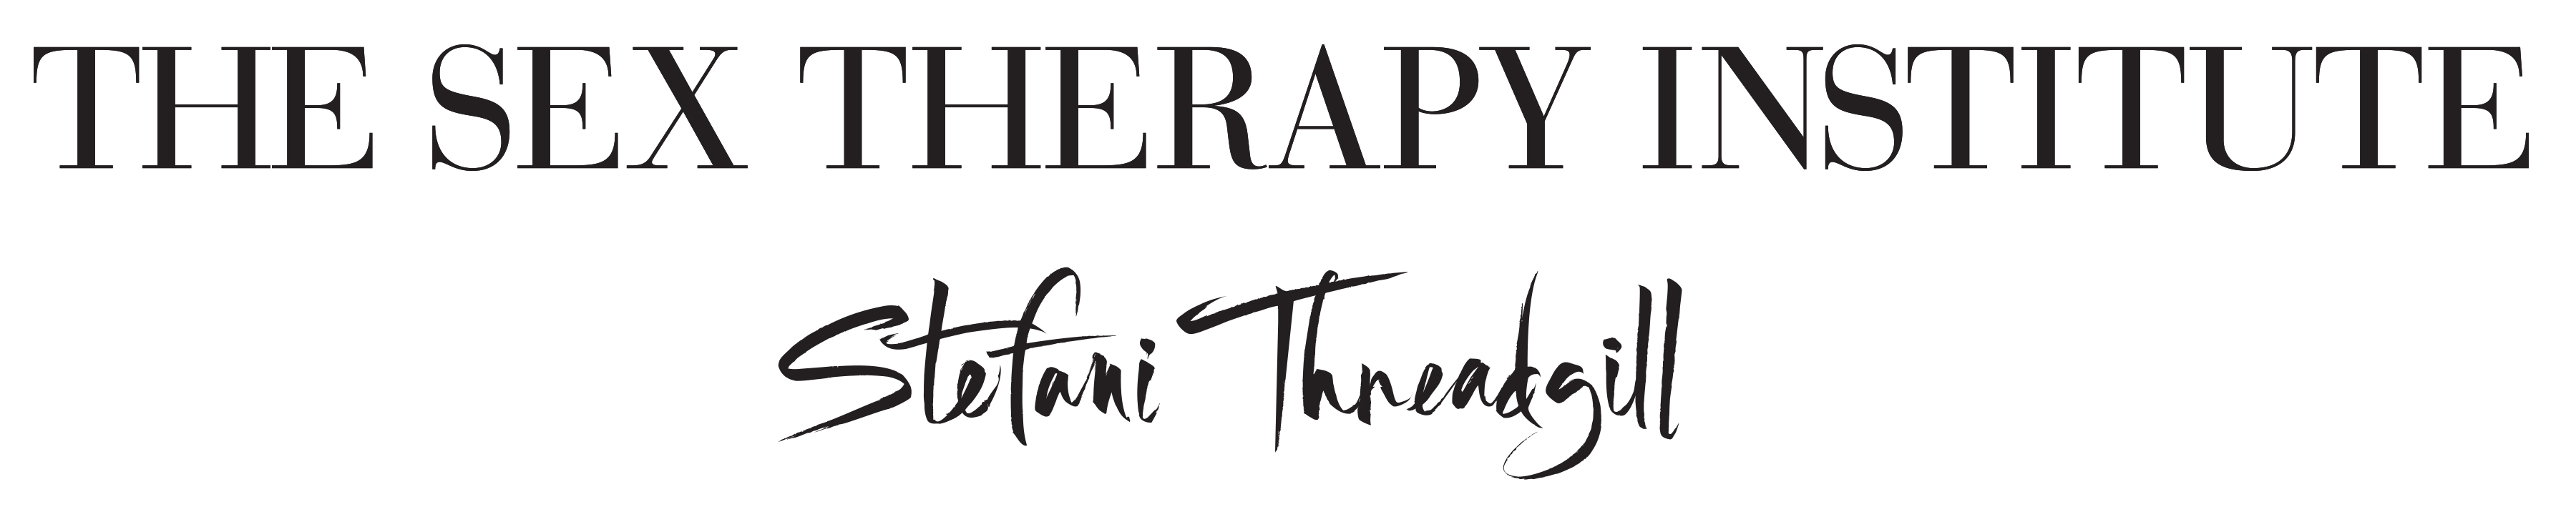 Dr. Stefani Threadgill: The Sex Therapy Institute